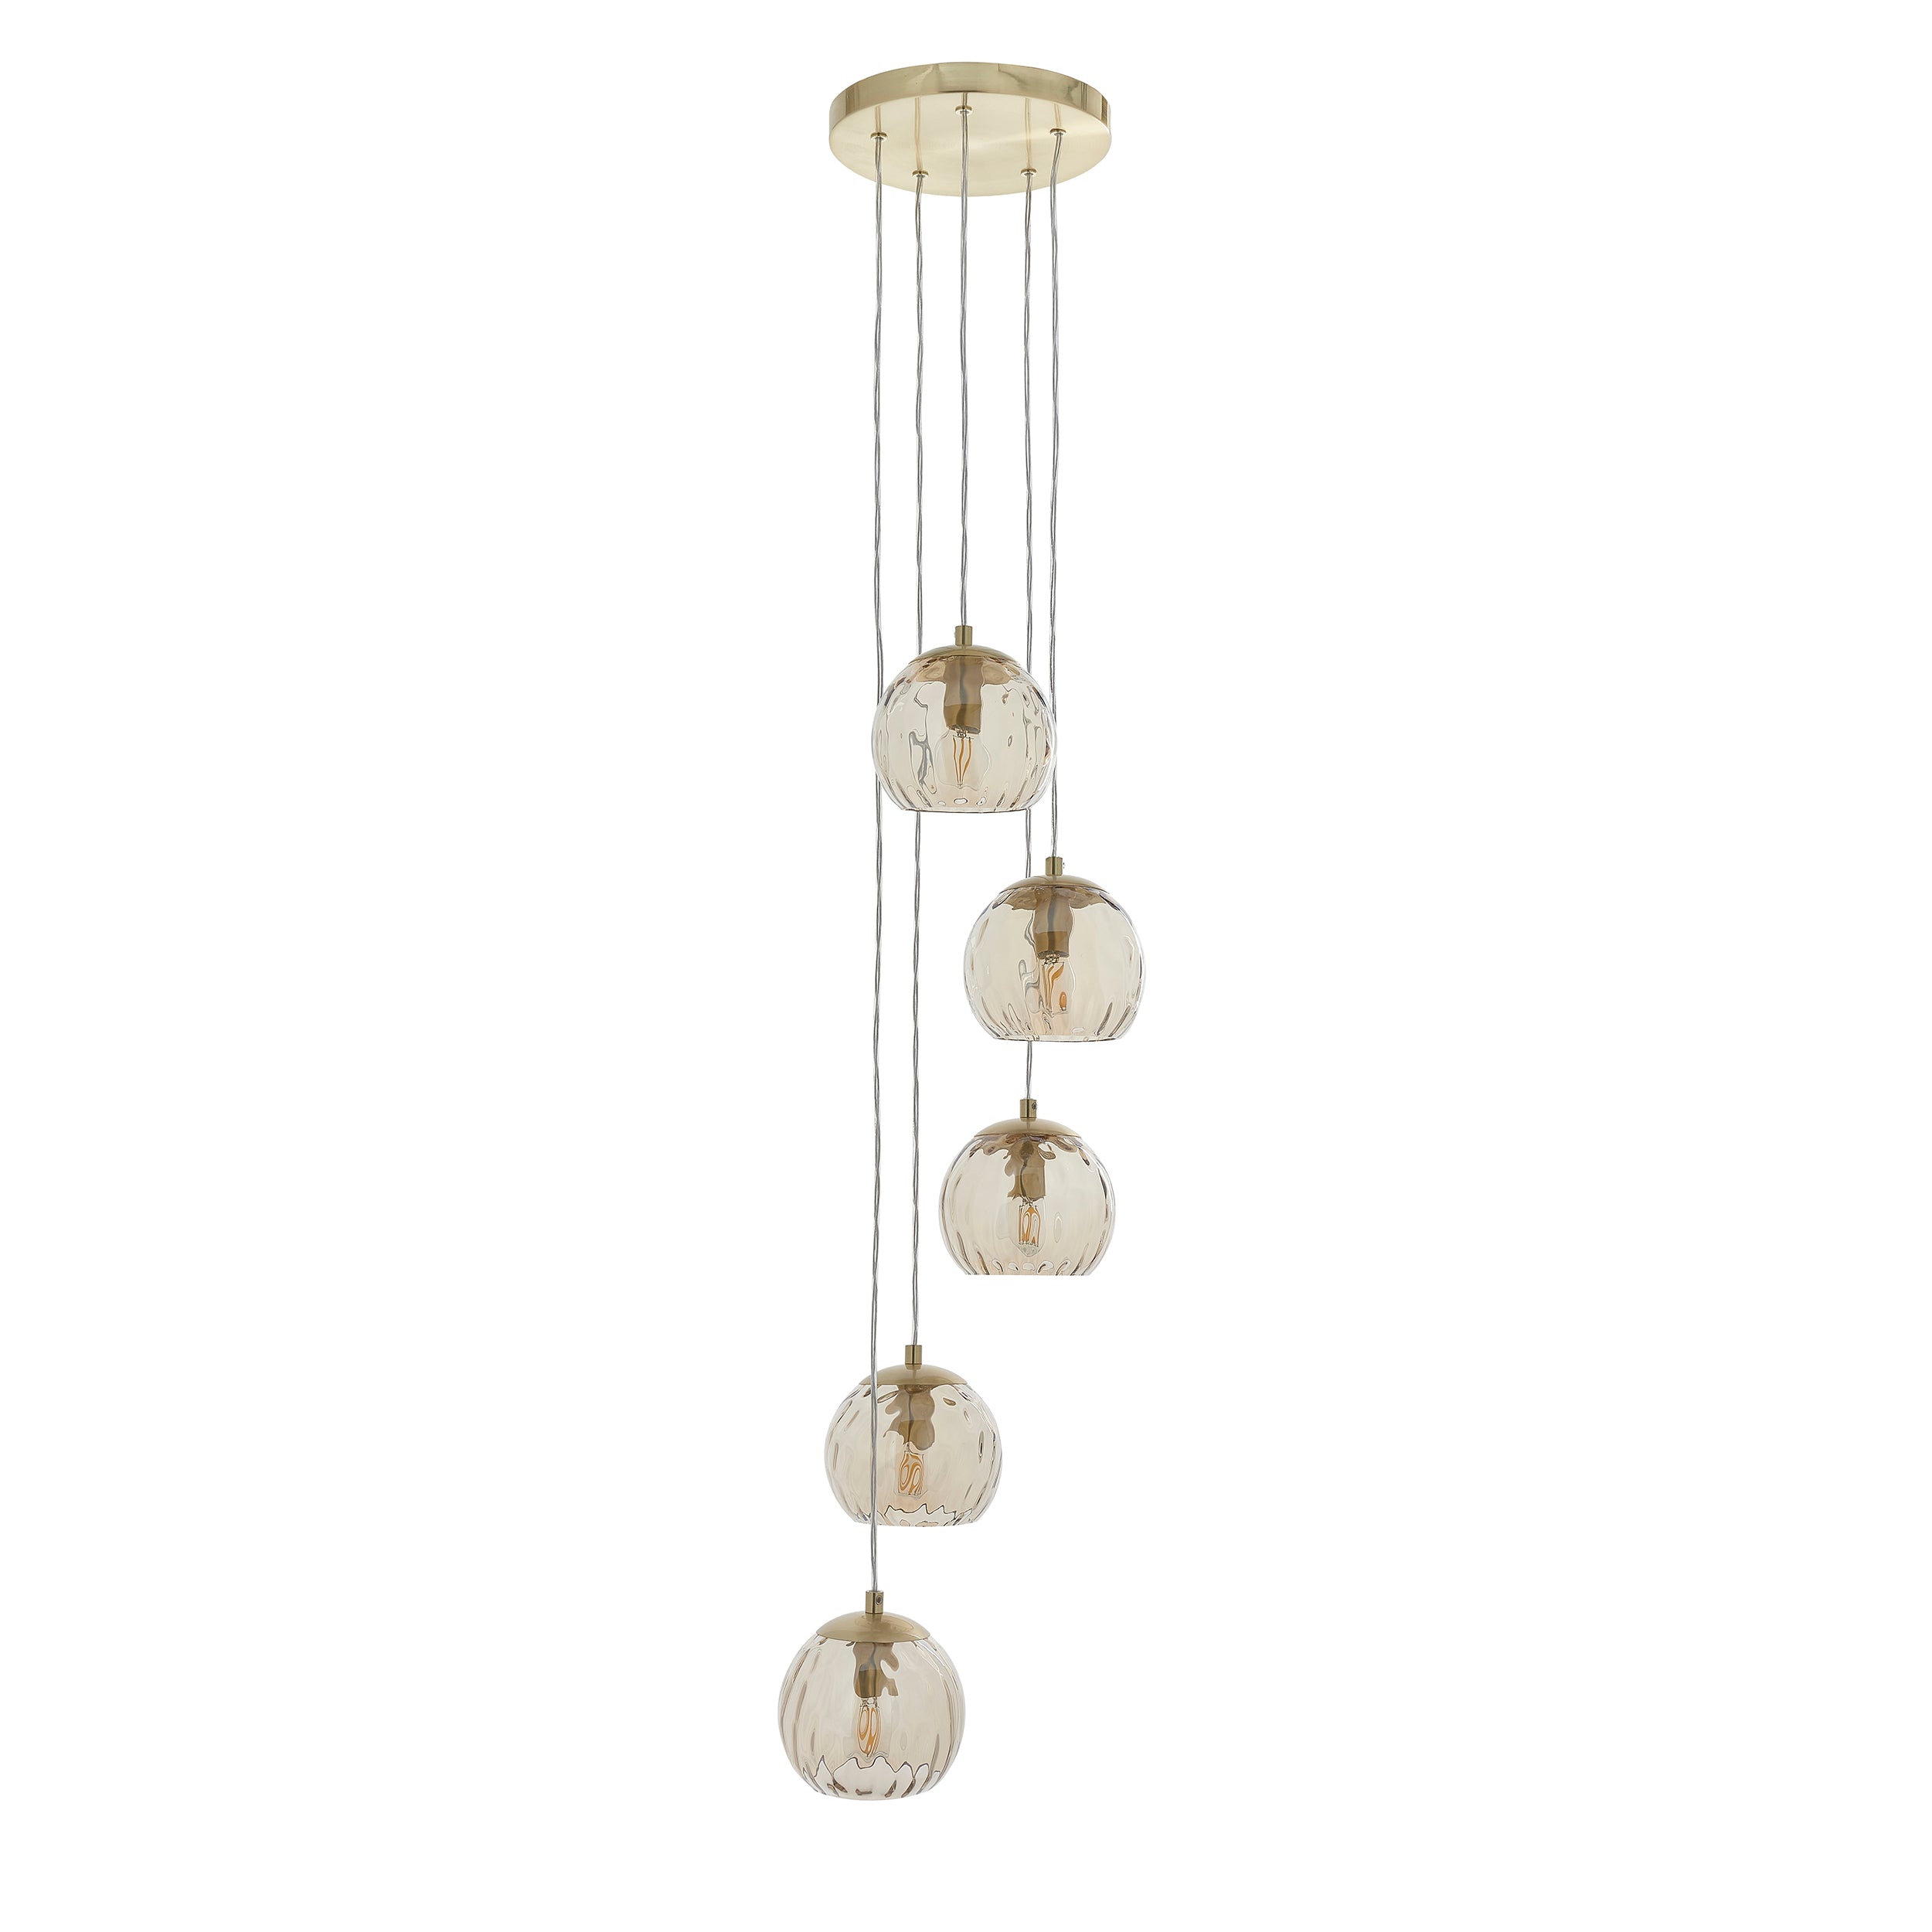 Dimple 5 Light Pendant. Satin Gold With Champagne Shades